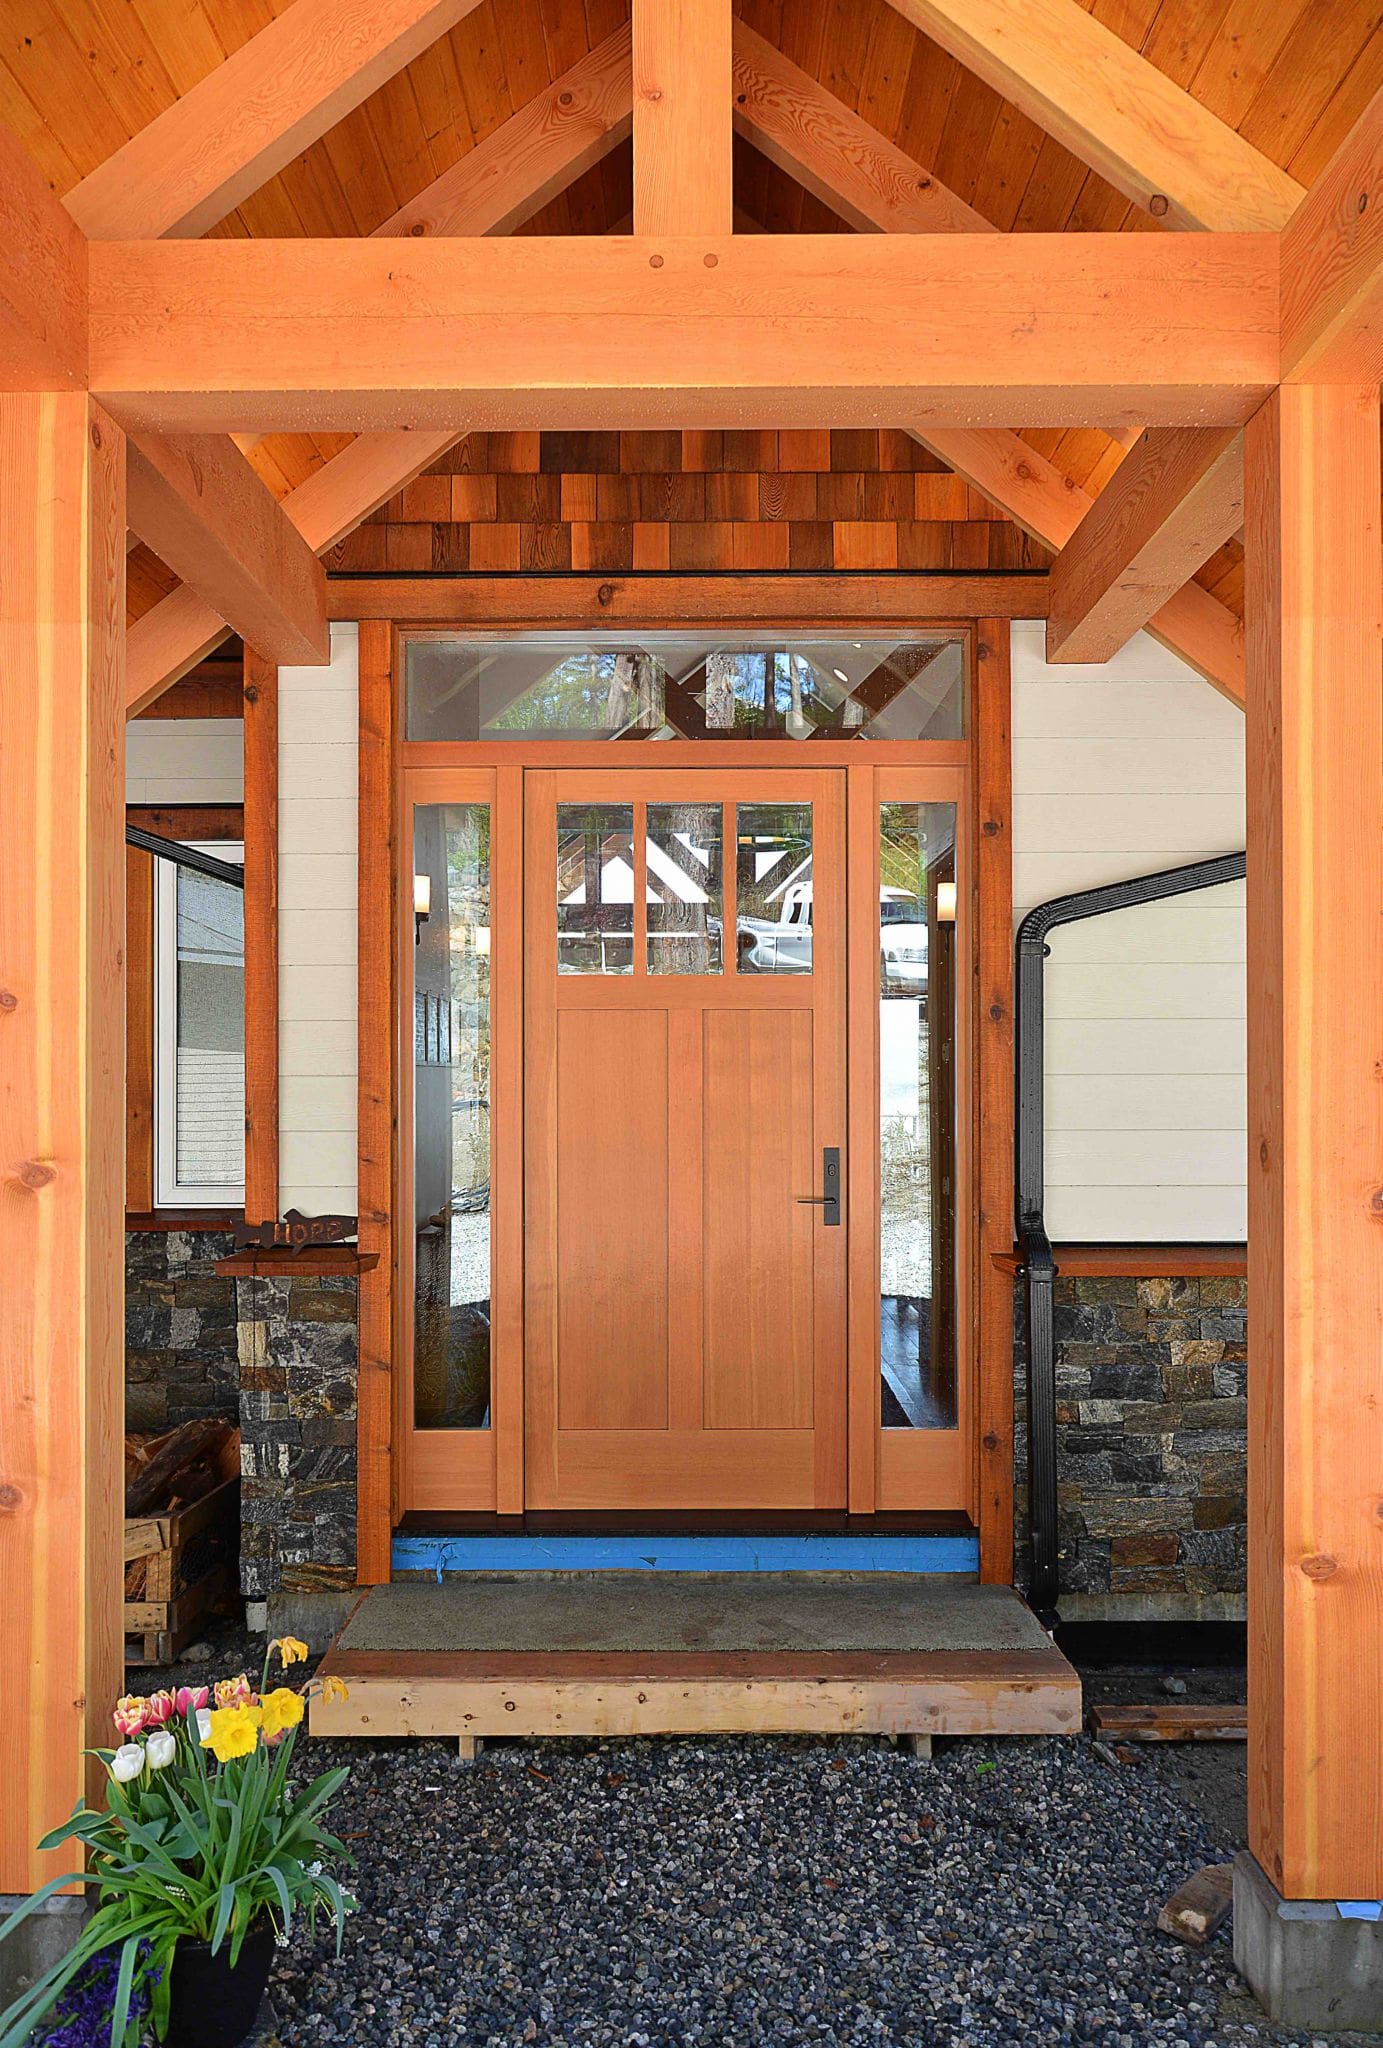 The wood door of a timber frame home